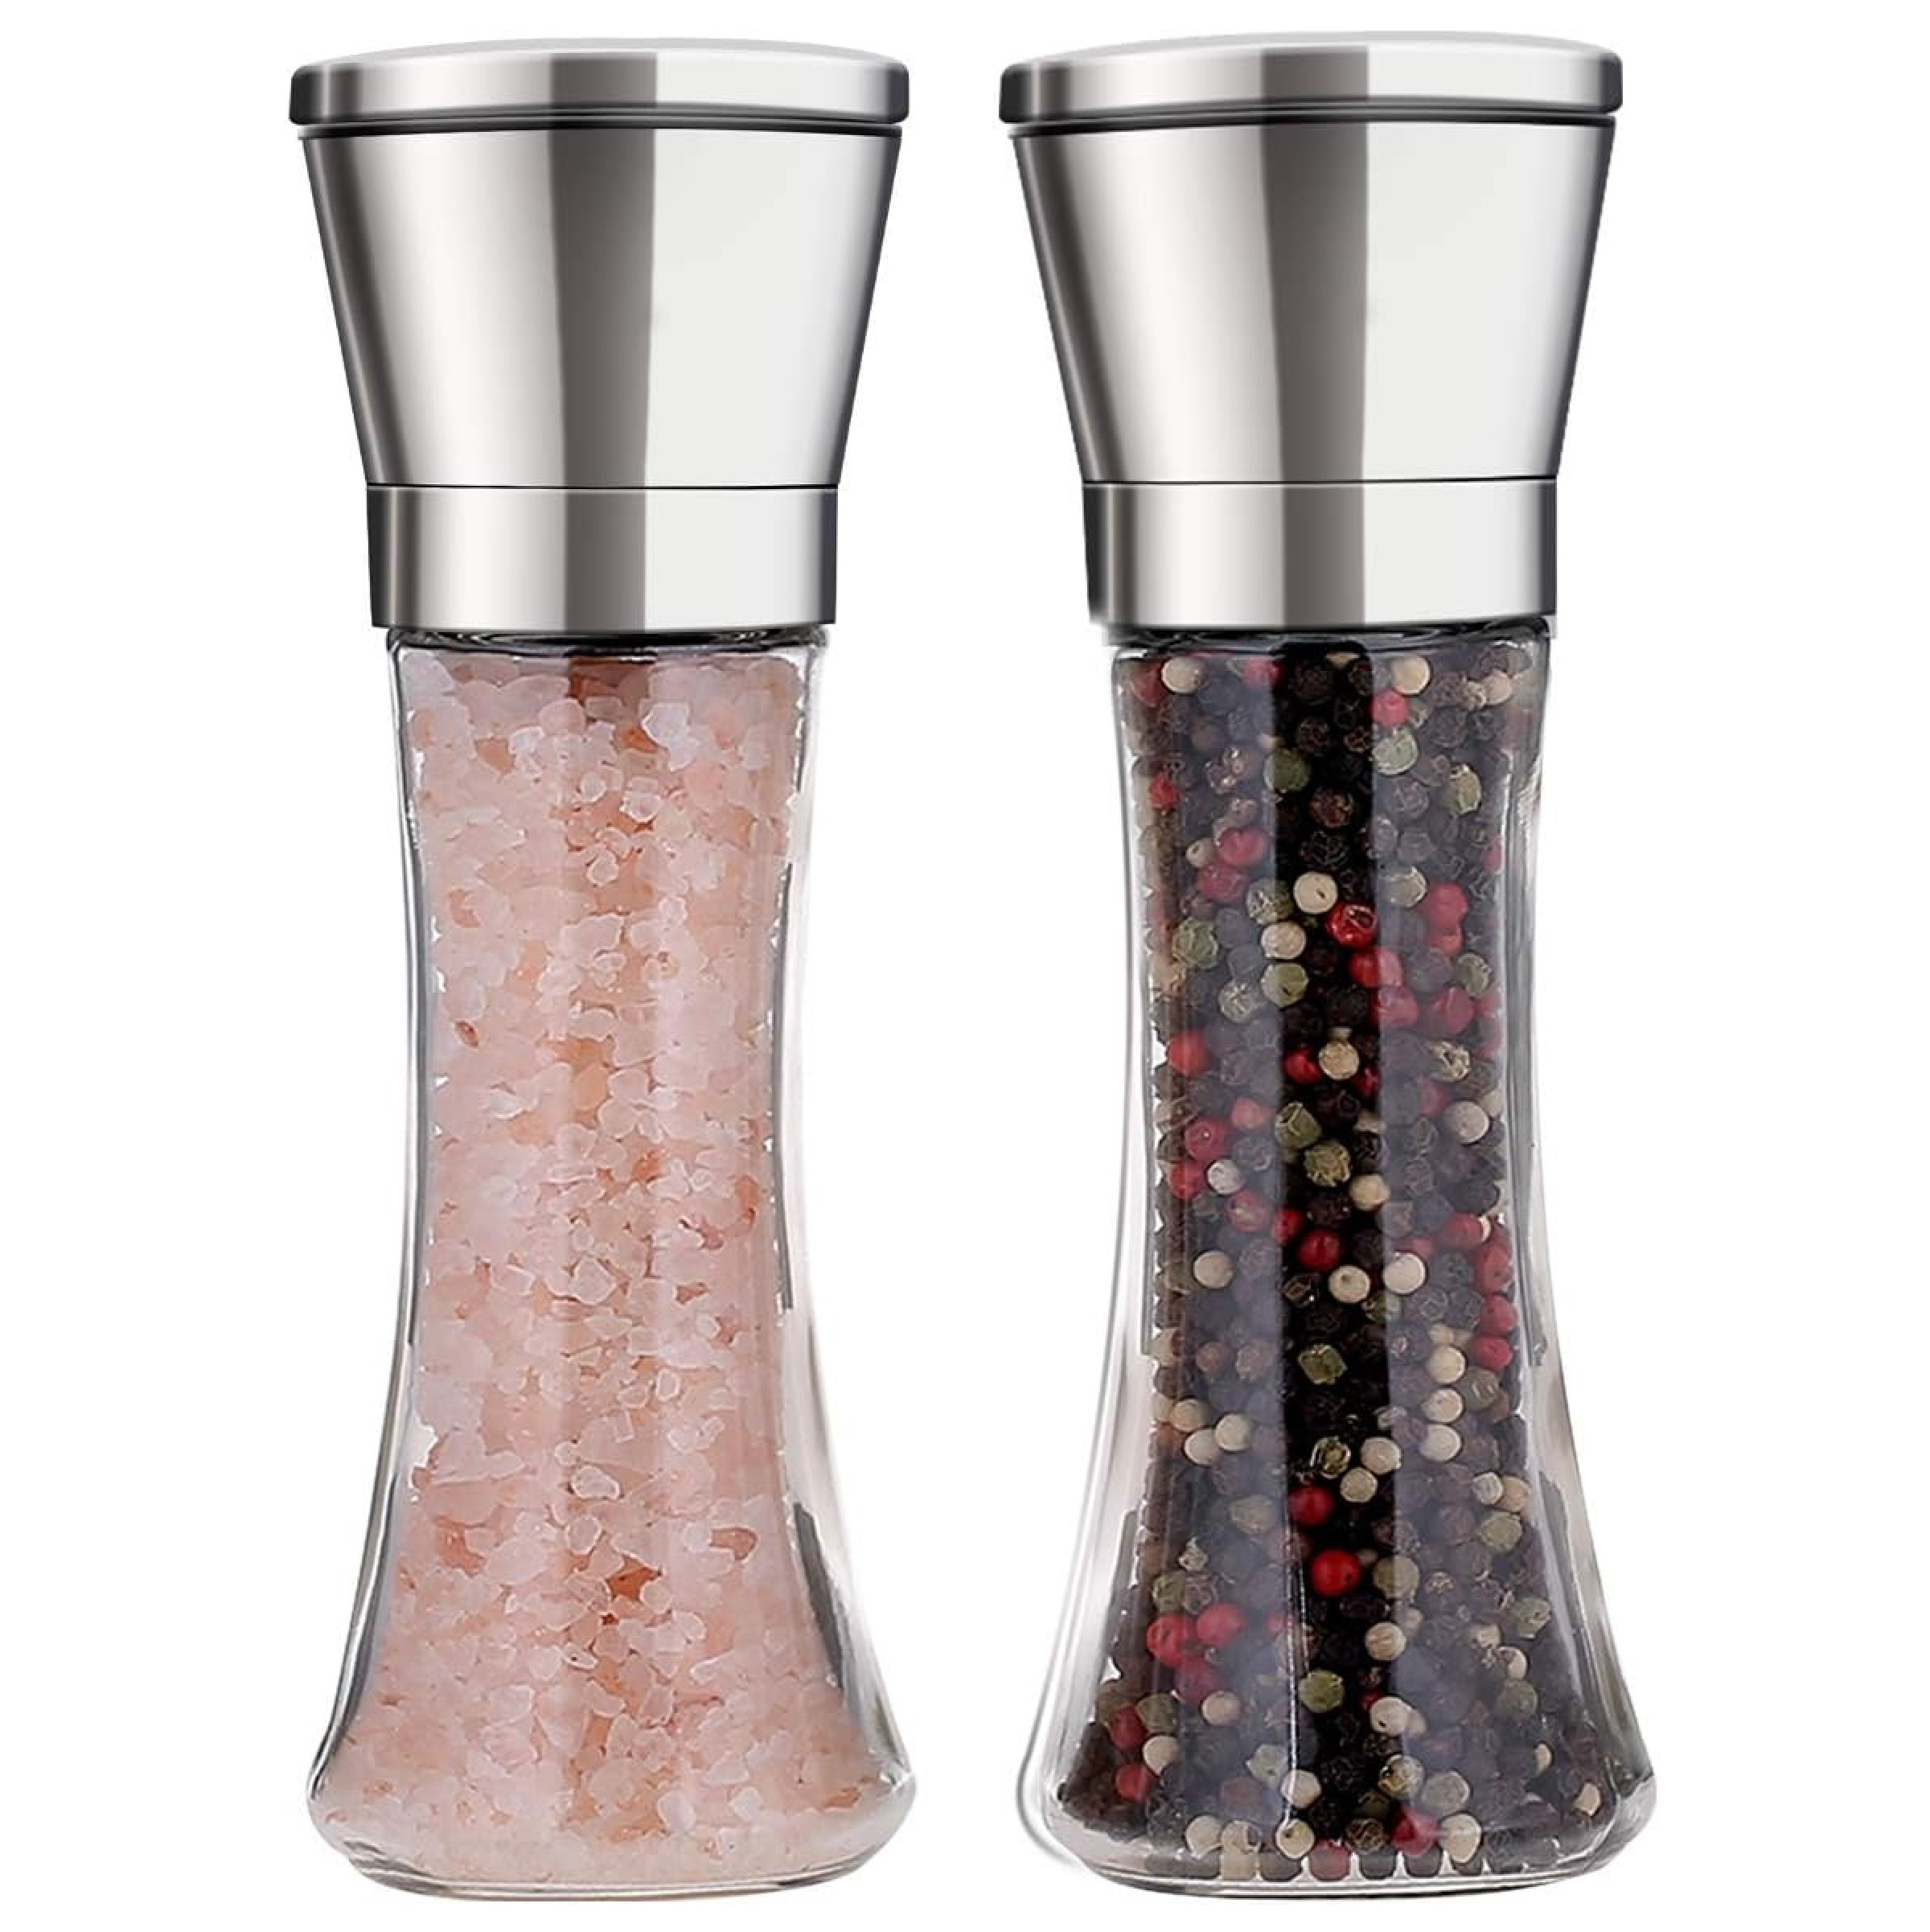 Salt And Pepper Grinder Set With Stand Stainless Steel&Glass